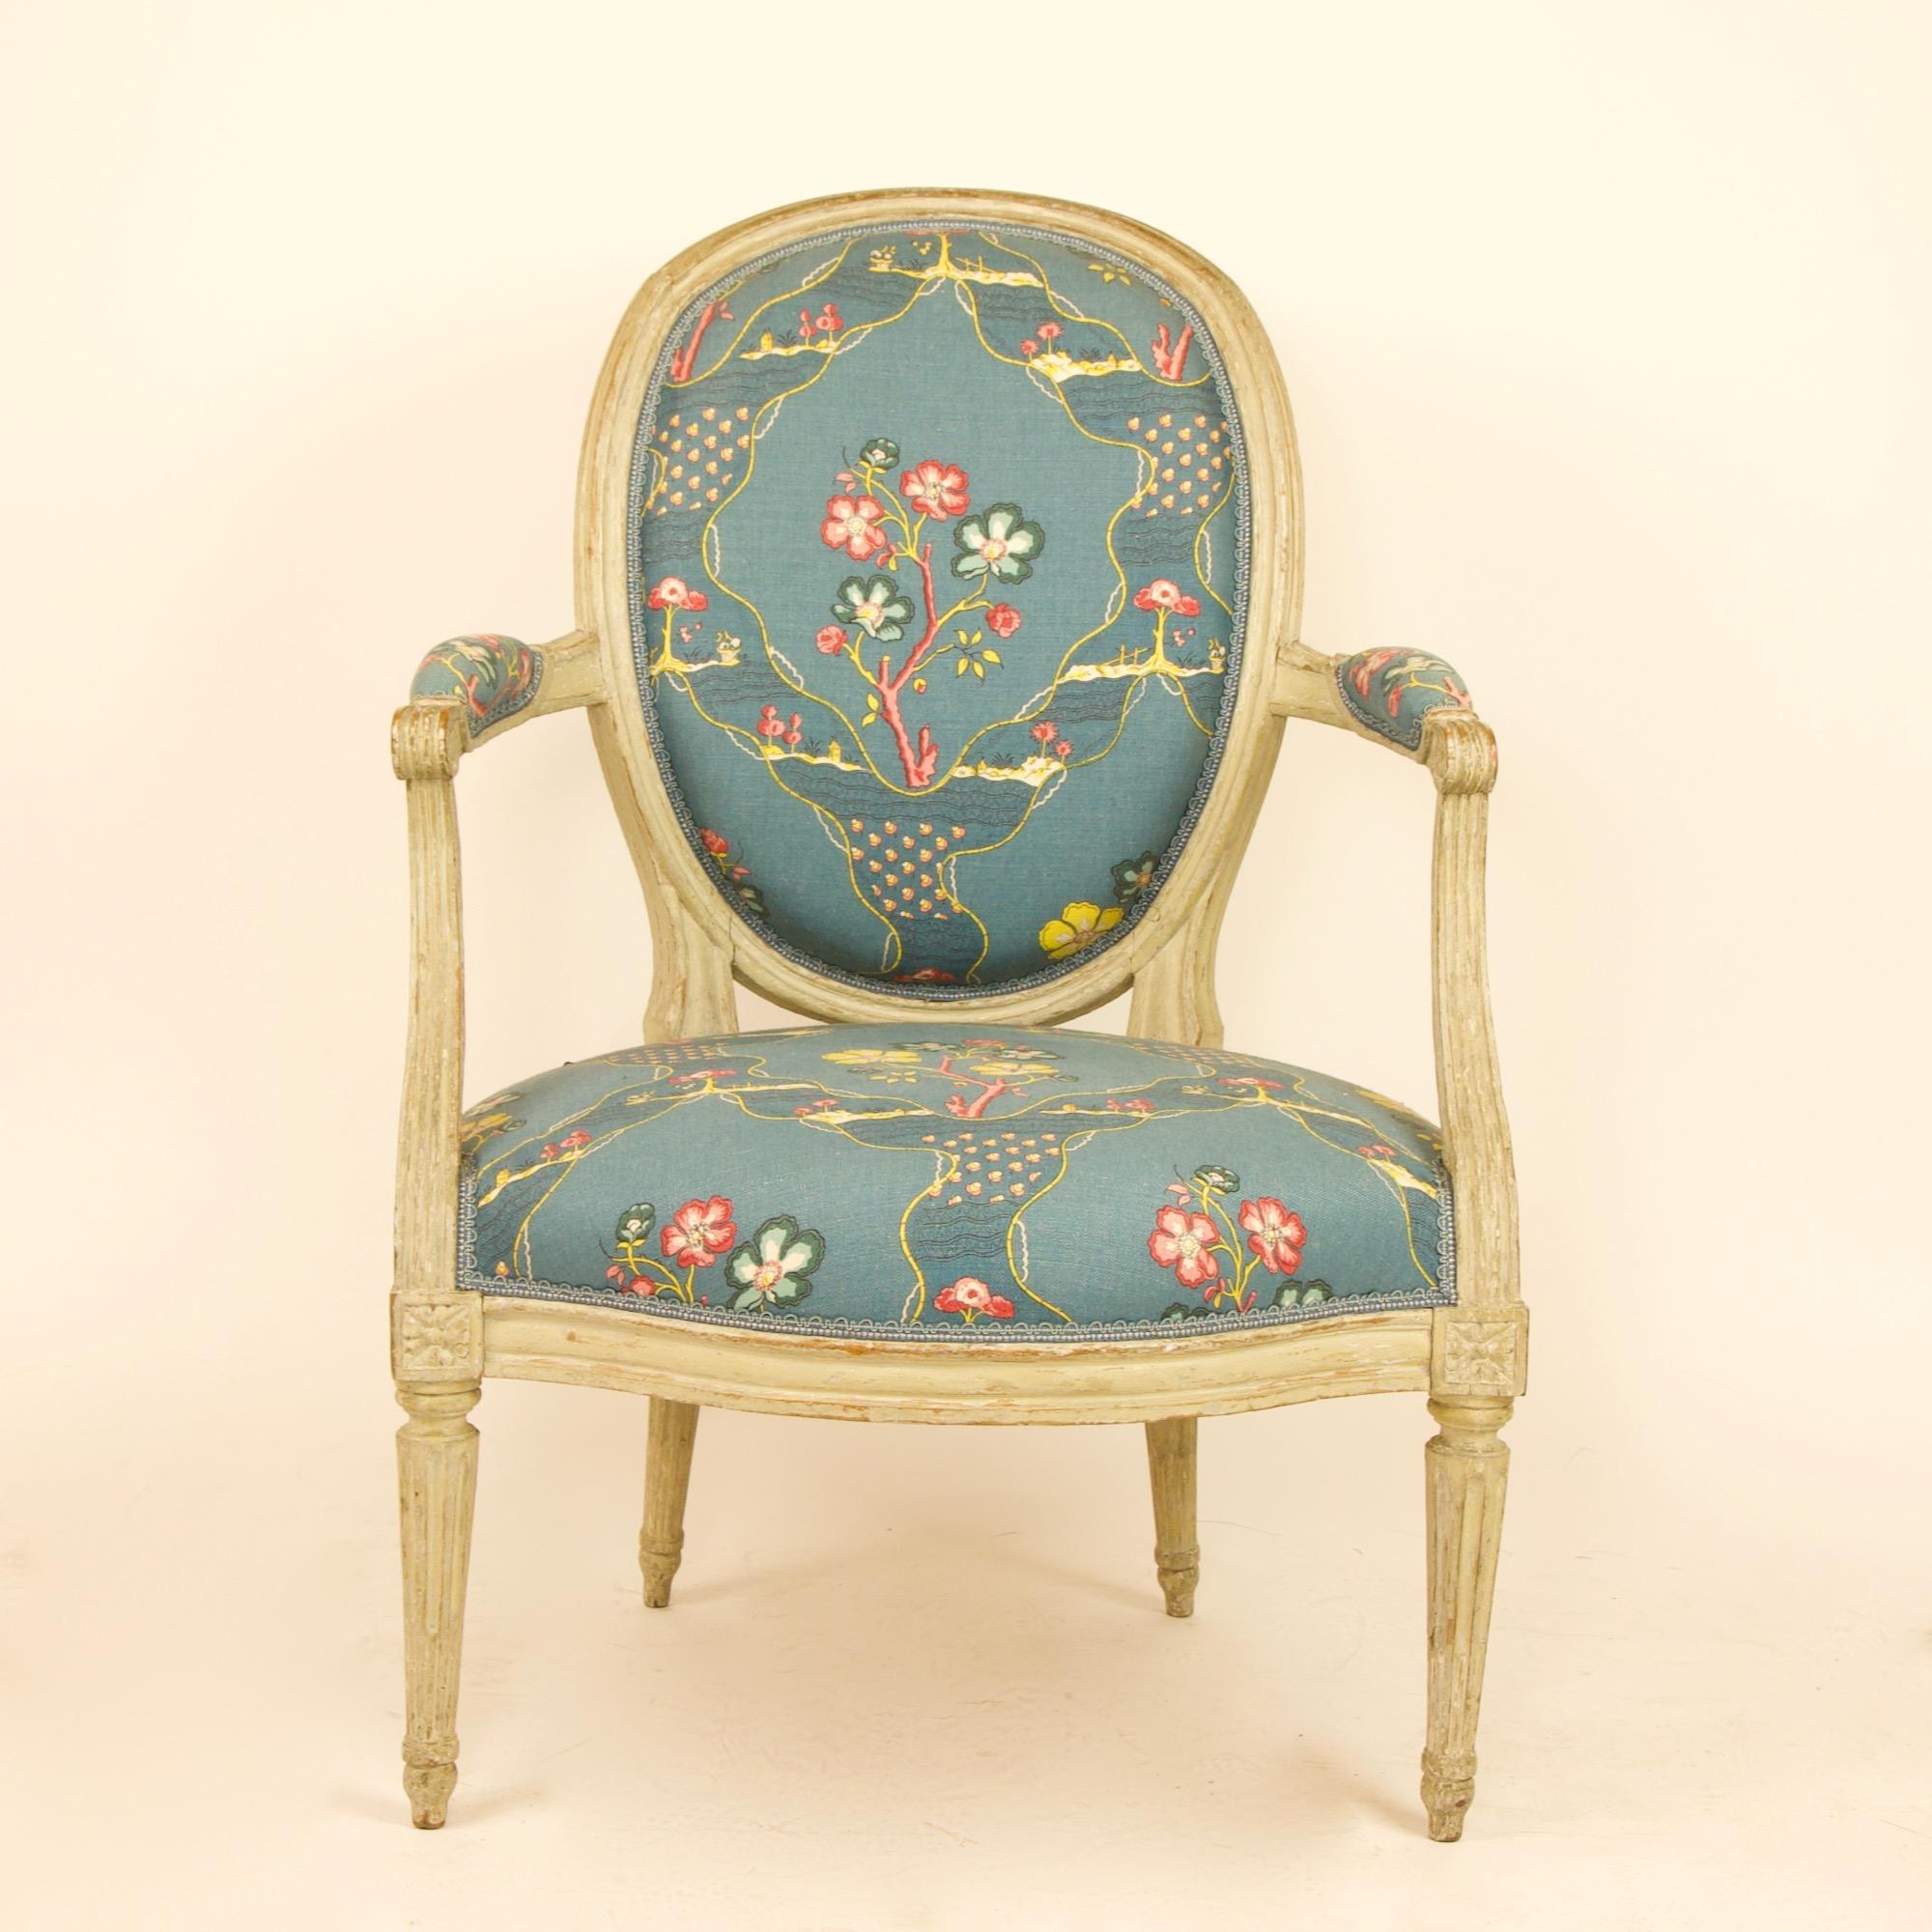 French 18th century Louis XVI painted wood armchair by George Jacob (1739-1814)

A Louis XVI period armchair or fauteuil 